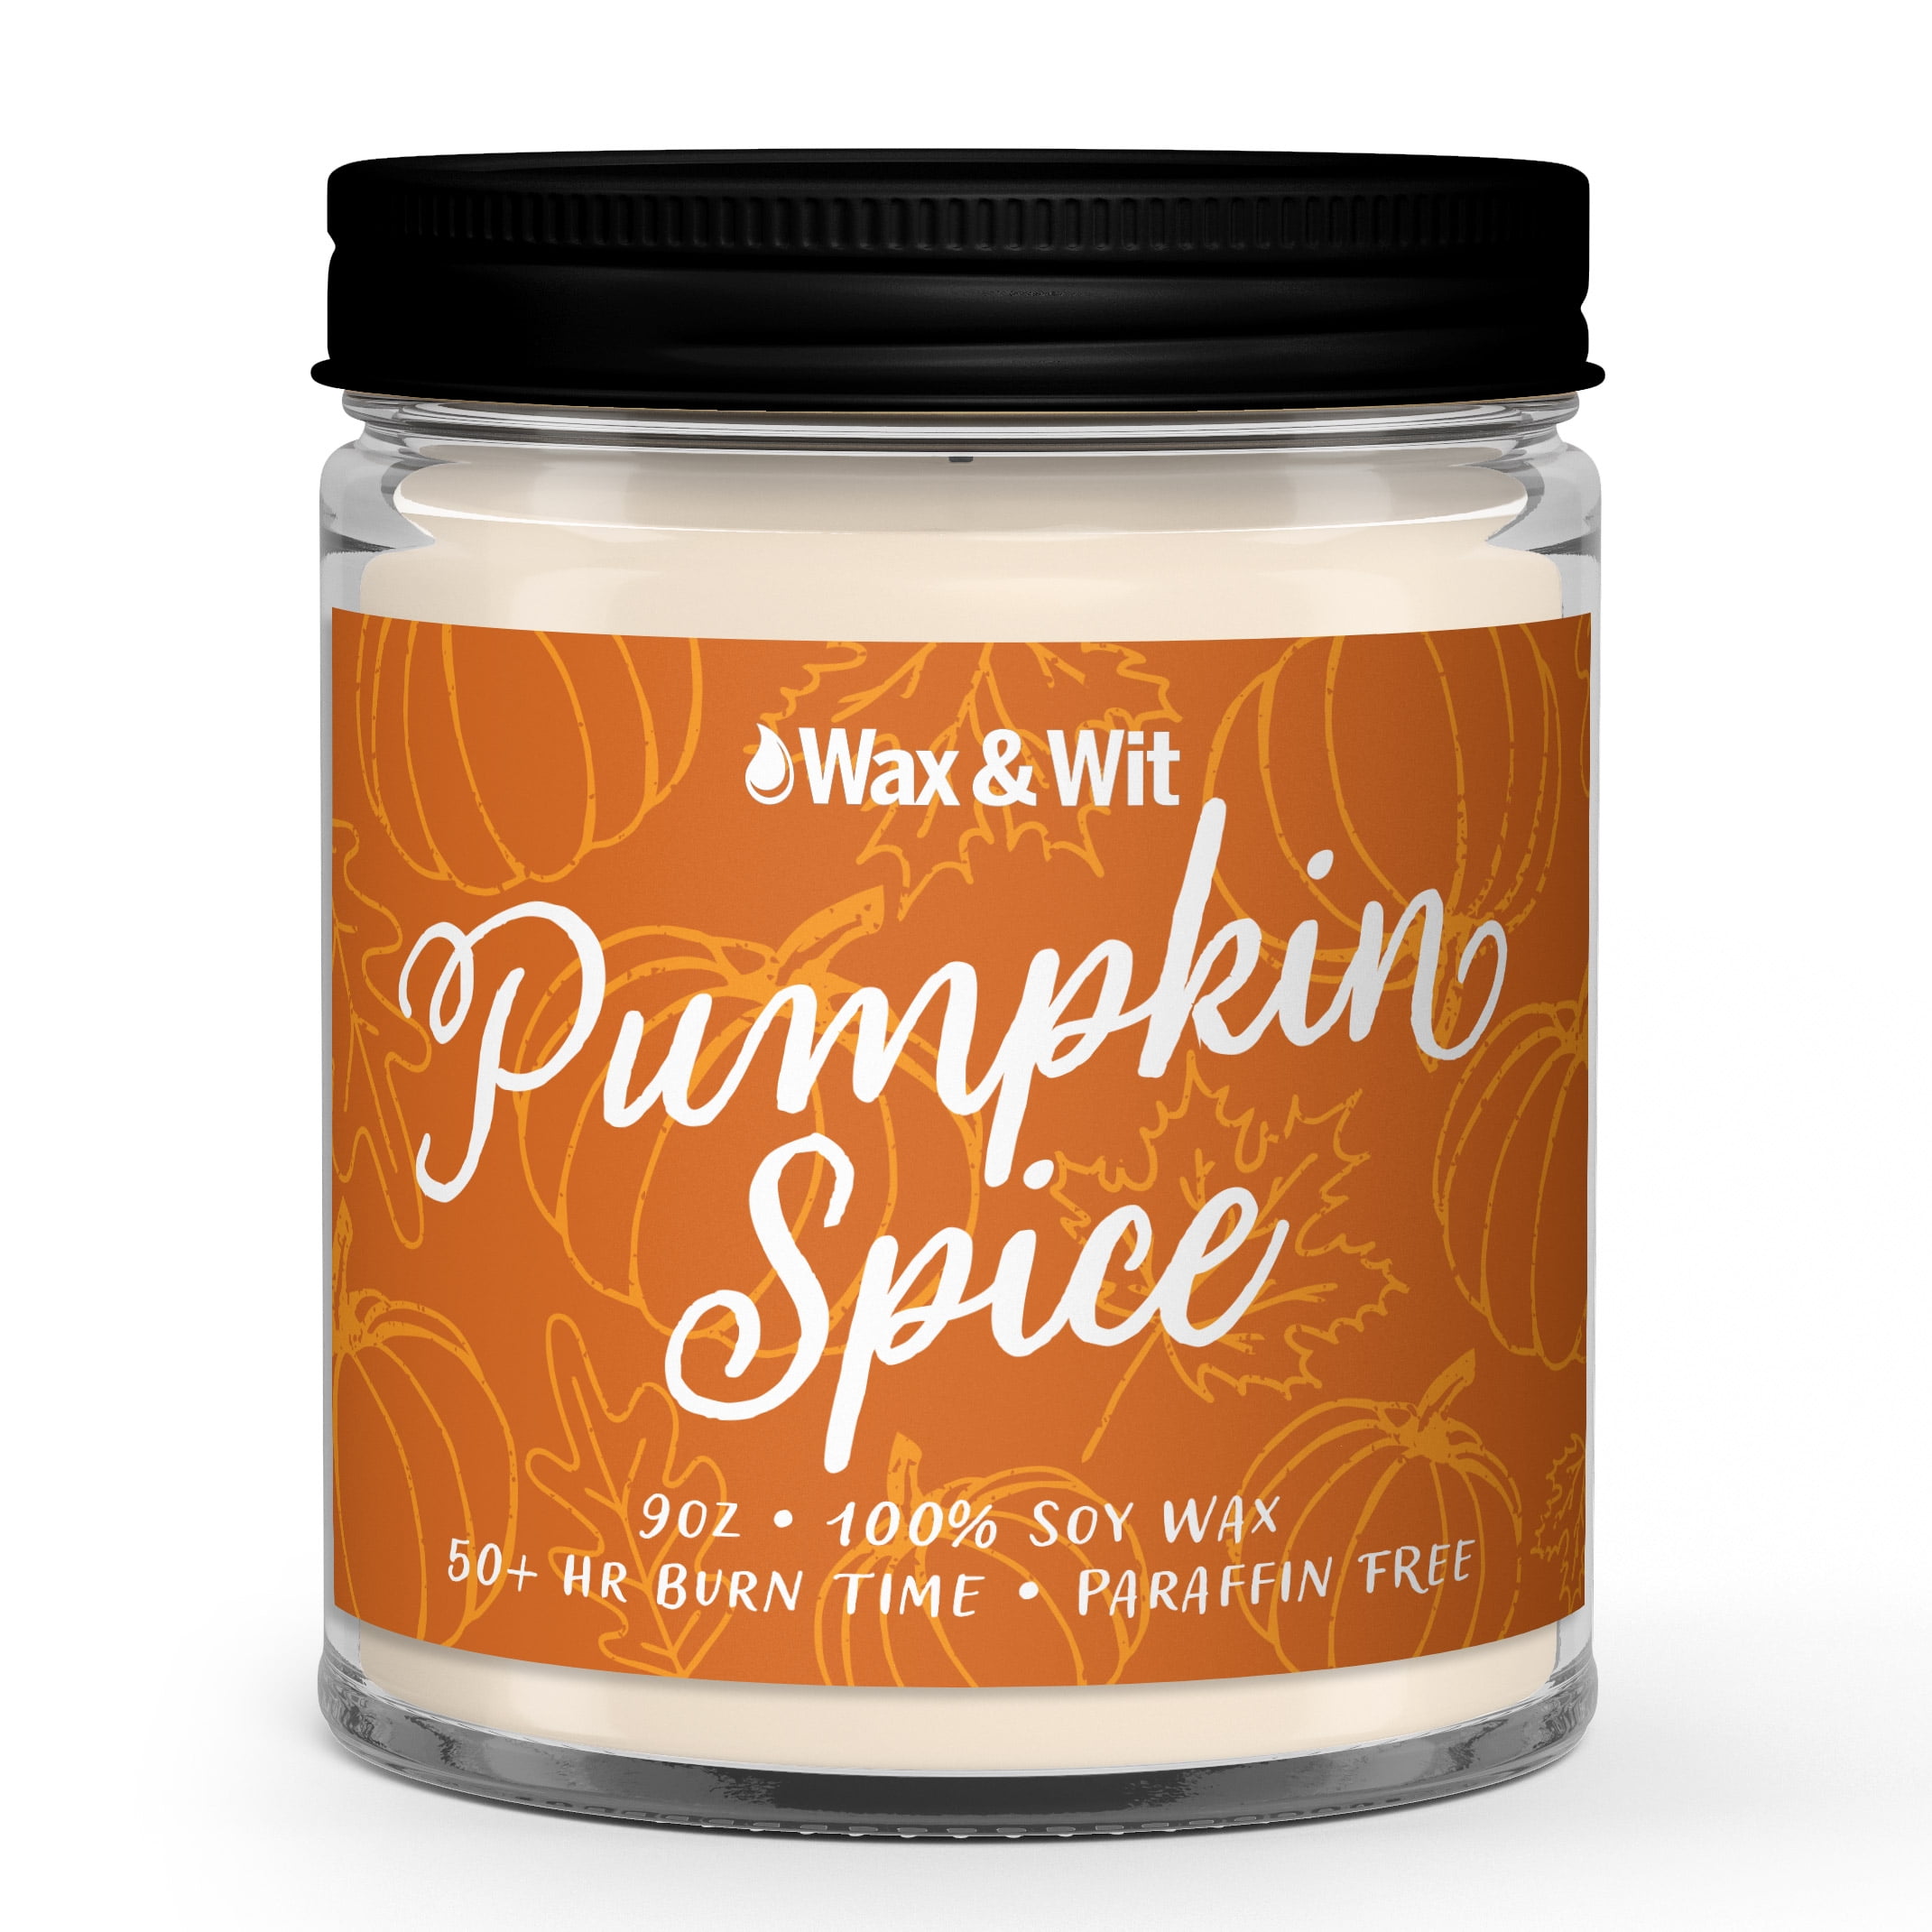 Pumpkin Chai Scent Handmade 100% Soy Wax Candles Hand Poured in Small Batches 32-hour Burn Time |